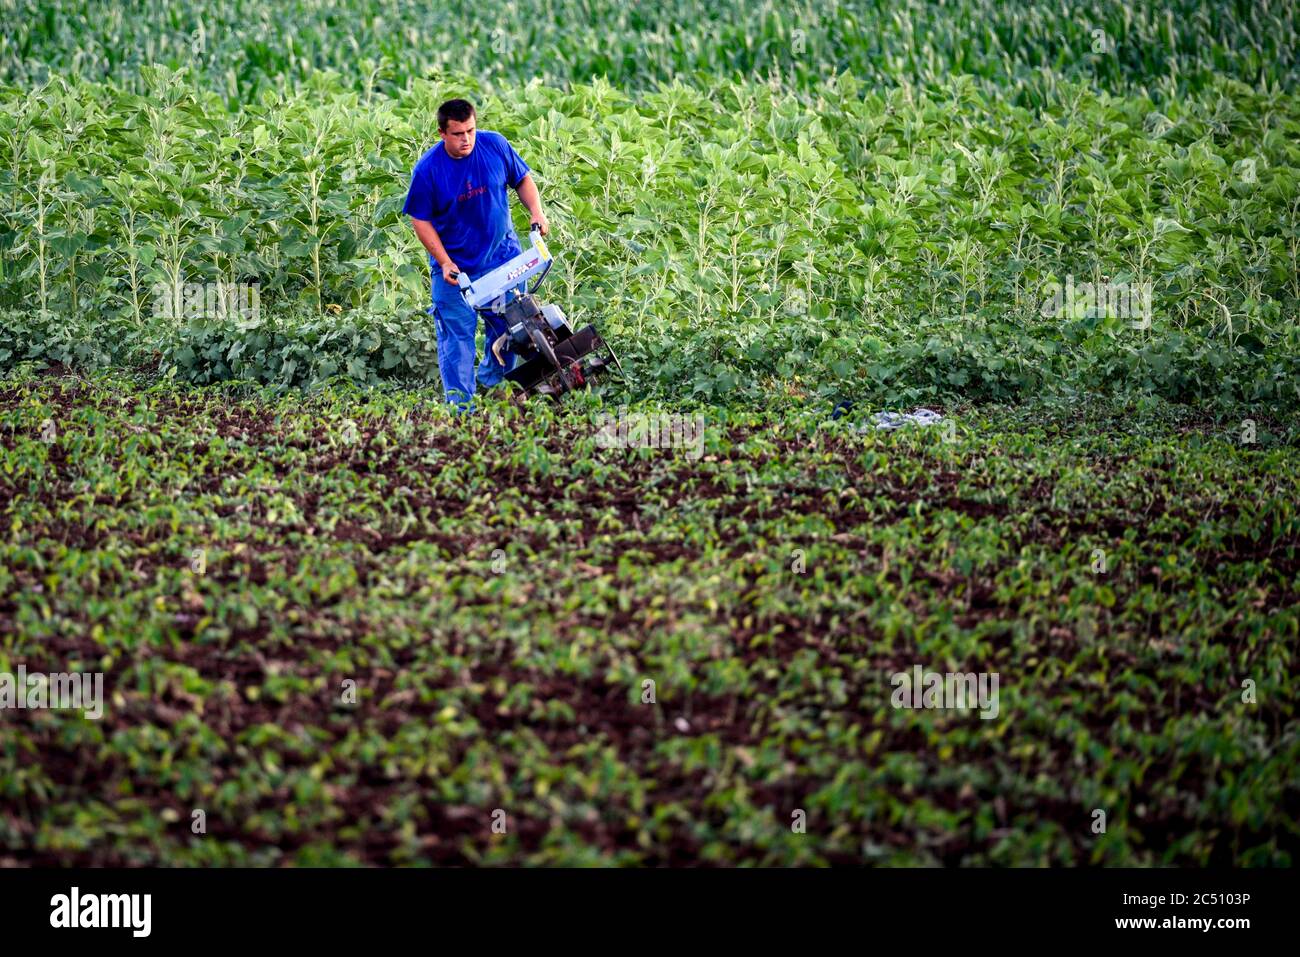 Kumanovo, North Macedonia. 29th June, 2020. A farmer works at a field at a village near Kumanovo, North Macedonia, on June 29, 2020. A heat wave hit North Macedonia on Monday and the temperature reached 38 degrees Celsius. Credit: Tomislav Georgiev/Xinhua/Alamy Live News Stock Photo